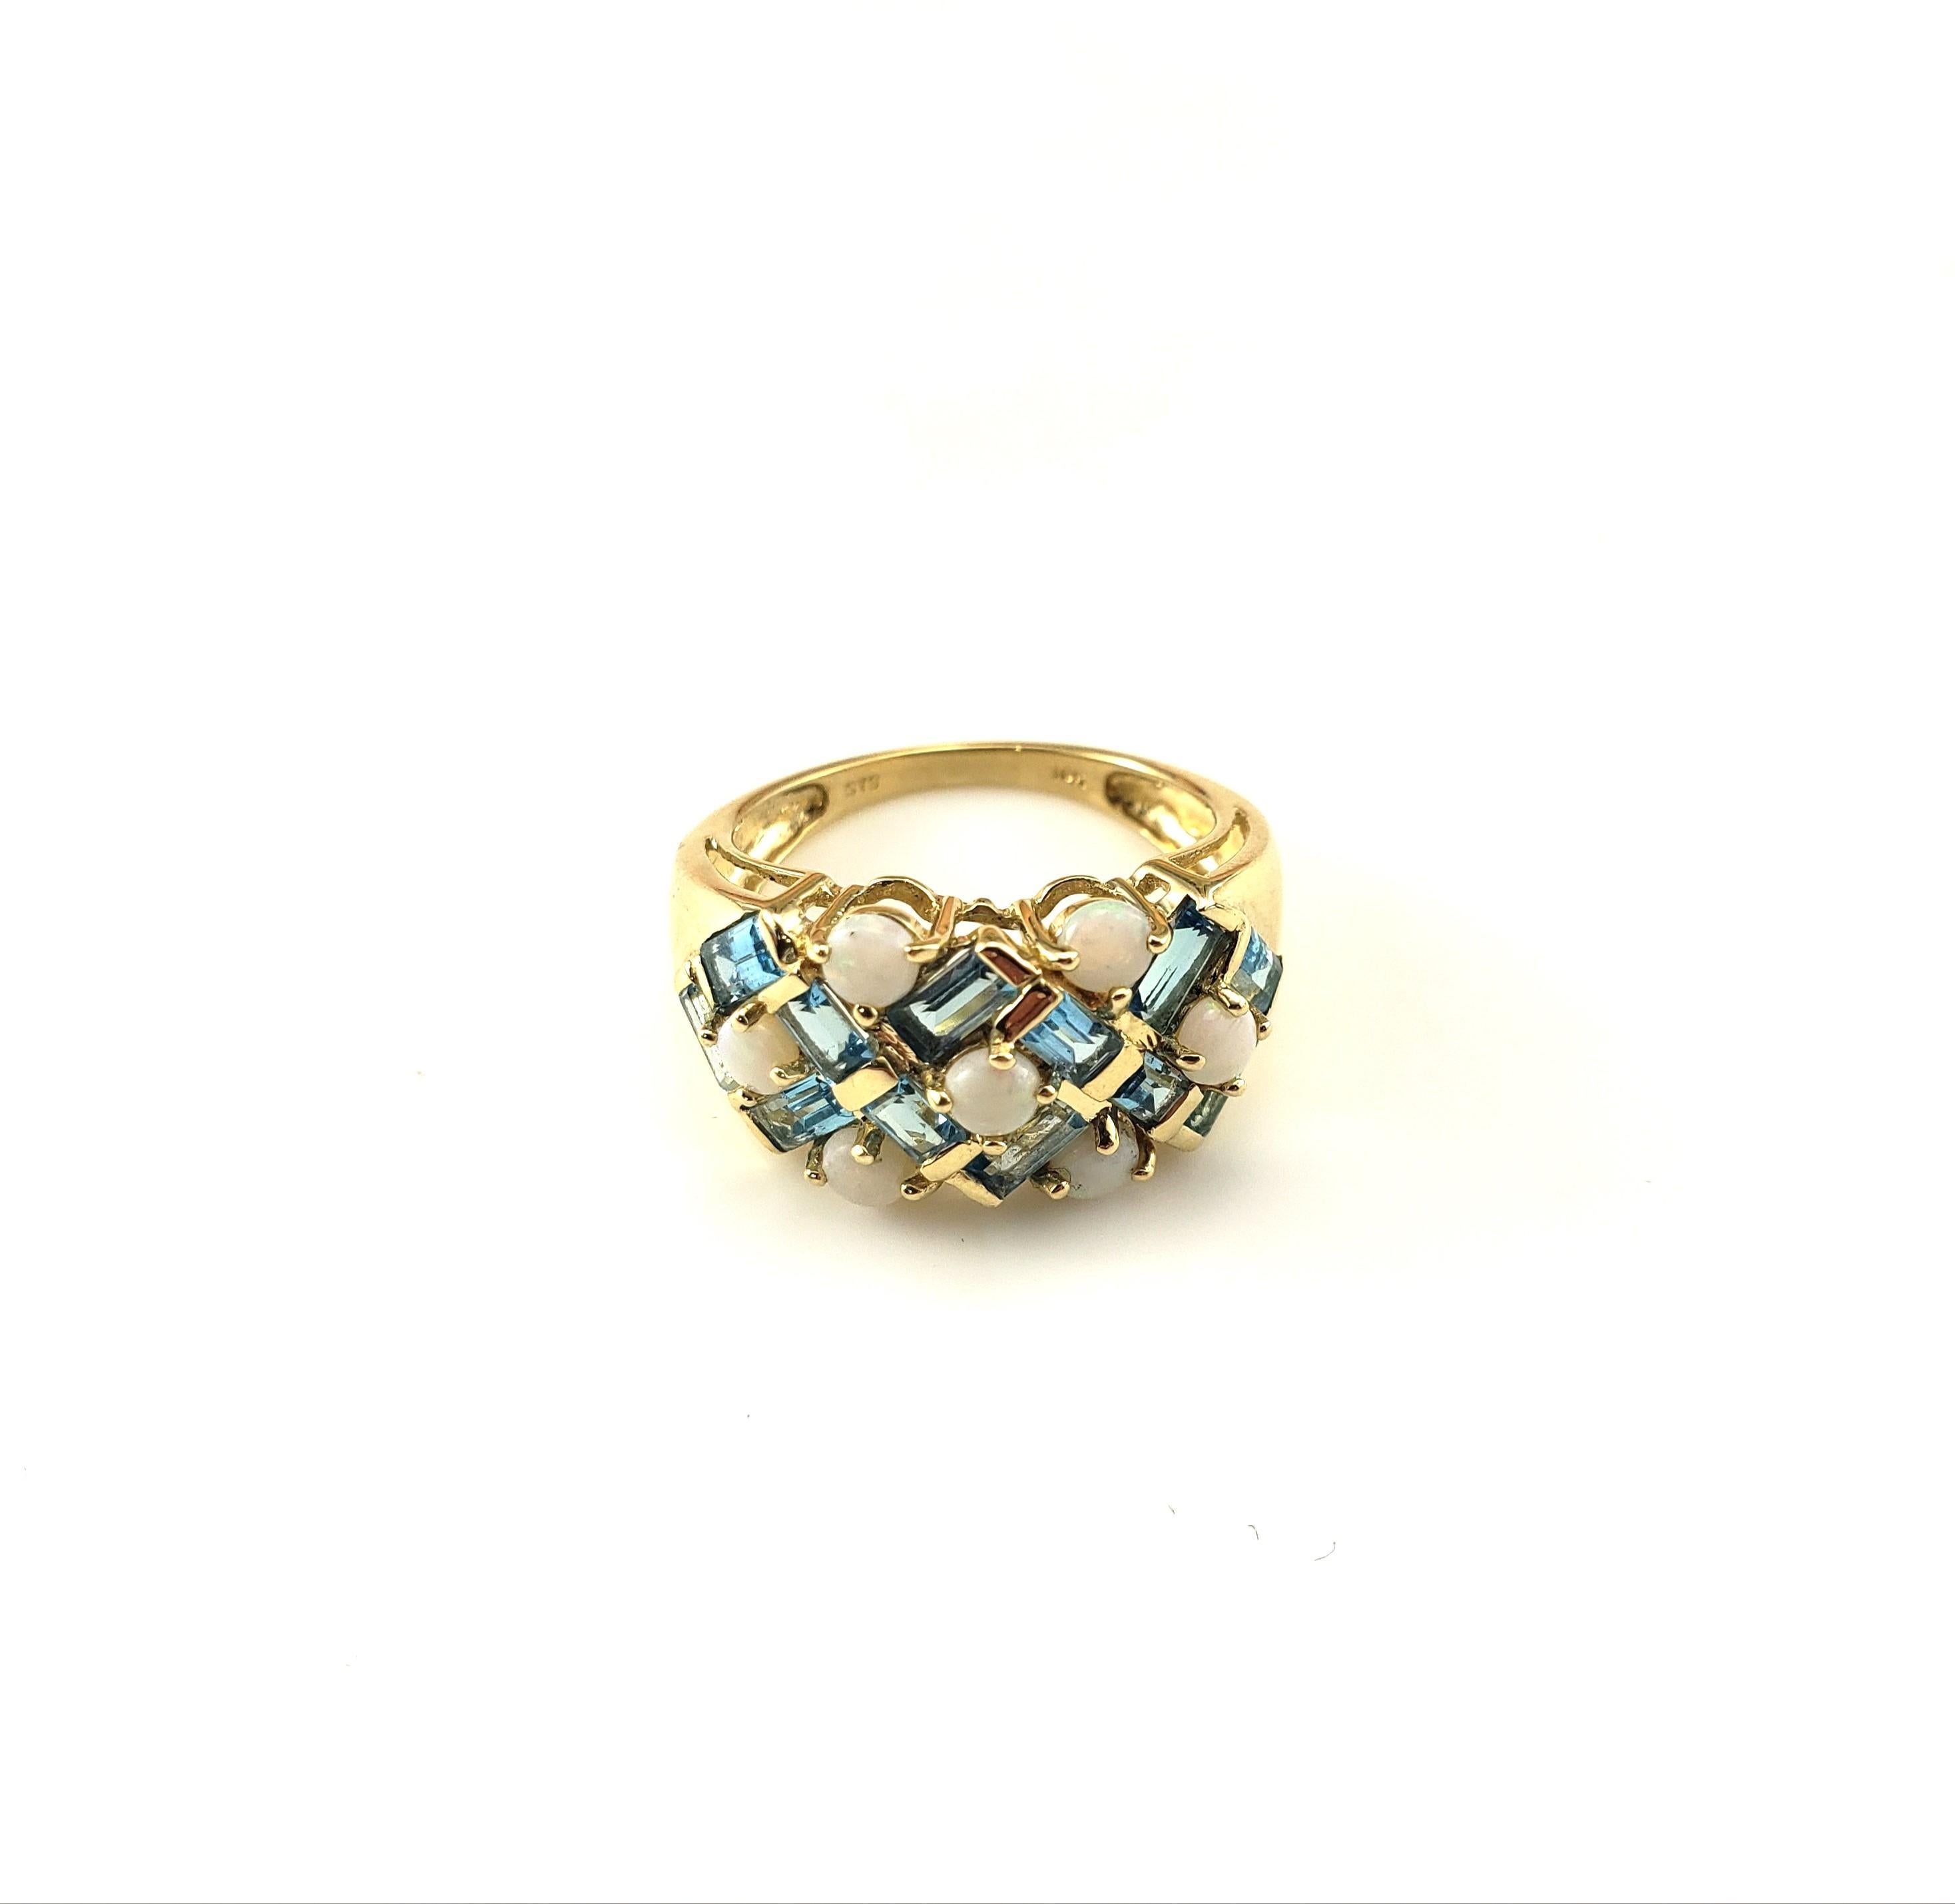 14K Yellow Gold Opal and Blue Topaz Ring Size 6

This stunning ring feature seven round opal stones and 12 baguette cut blue topaz stones set in classic 14K yellow gold.  

Width:  11 mm.  Shank: 2 mm.

Ring Size: 6

Stamped: 14K

Weight: 2.6